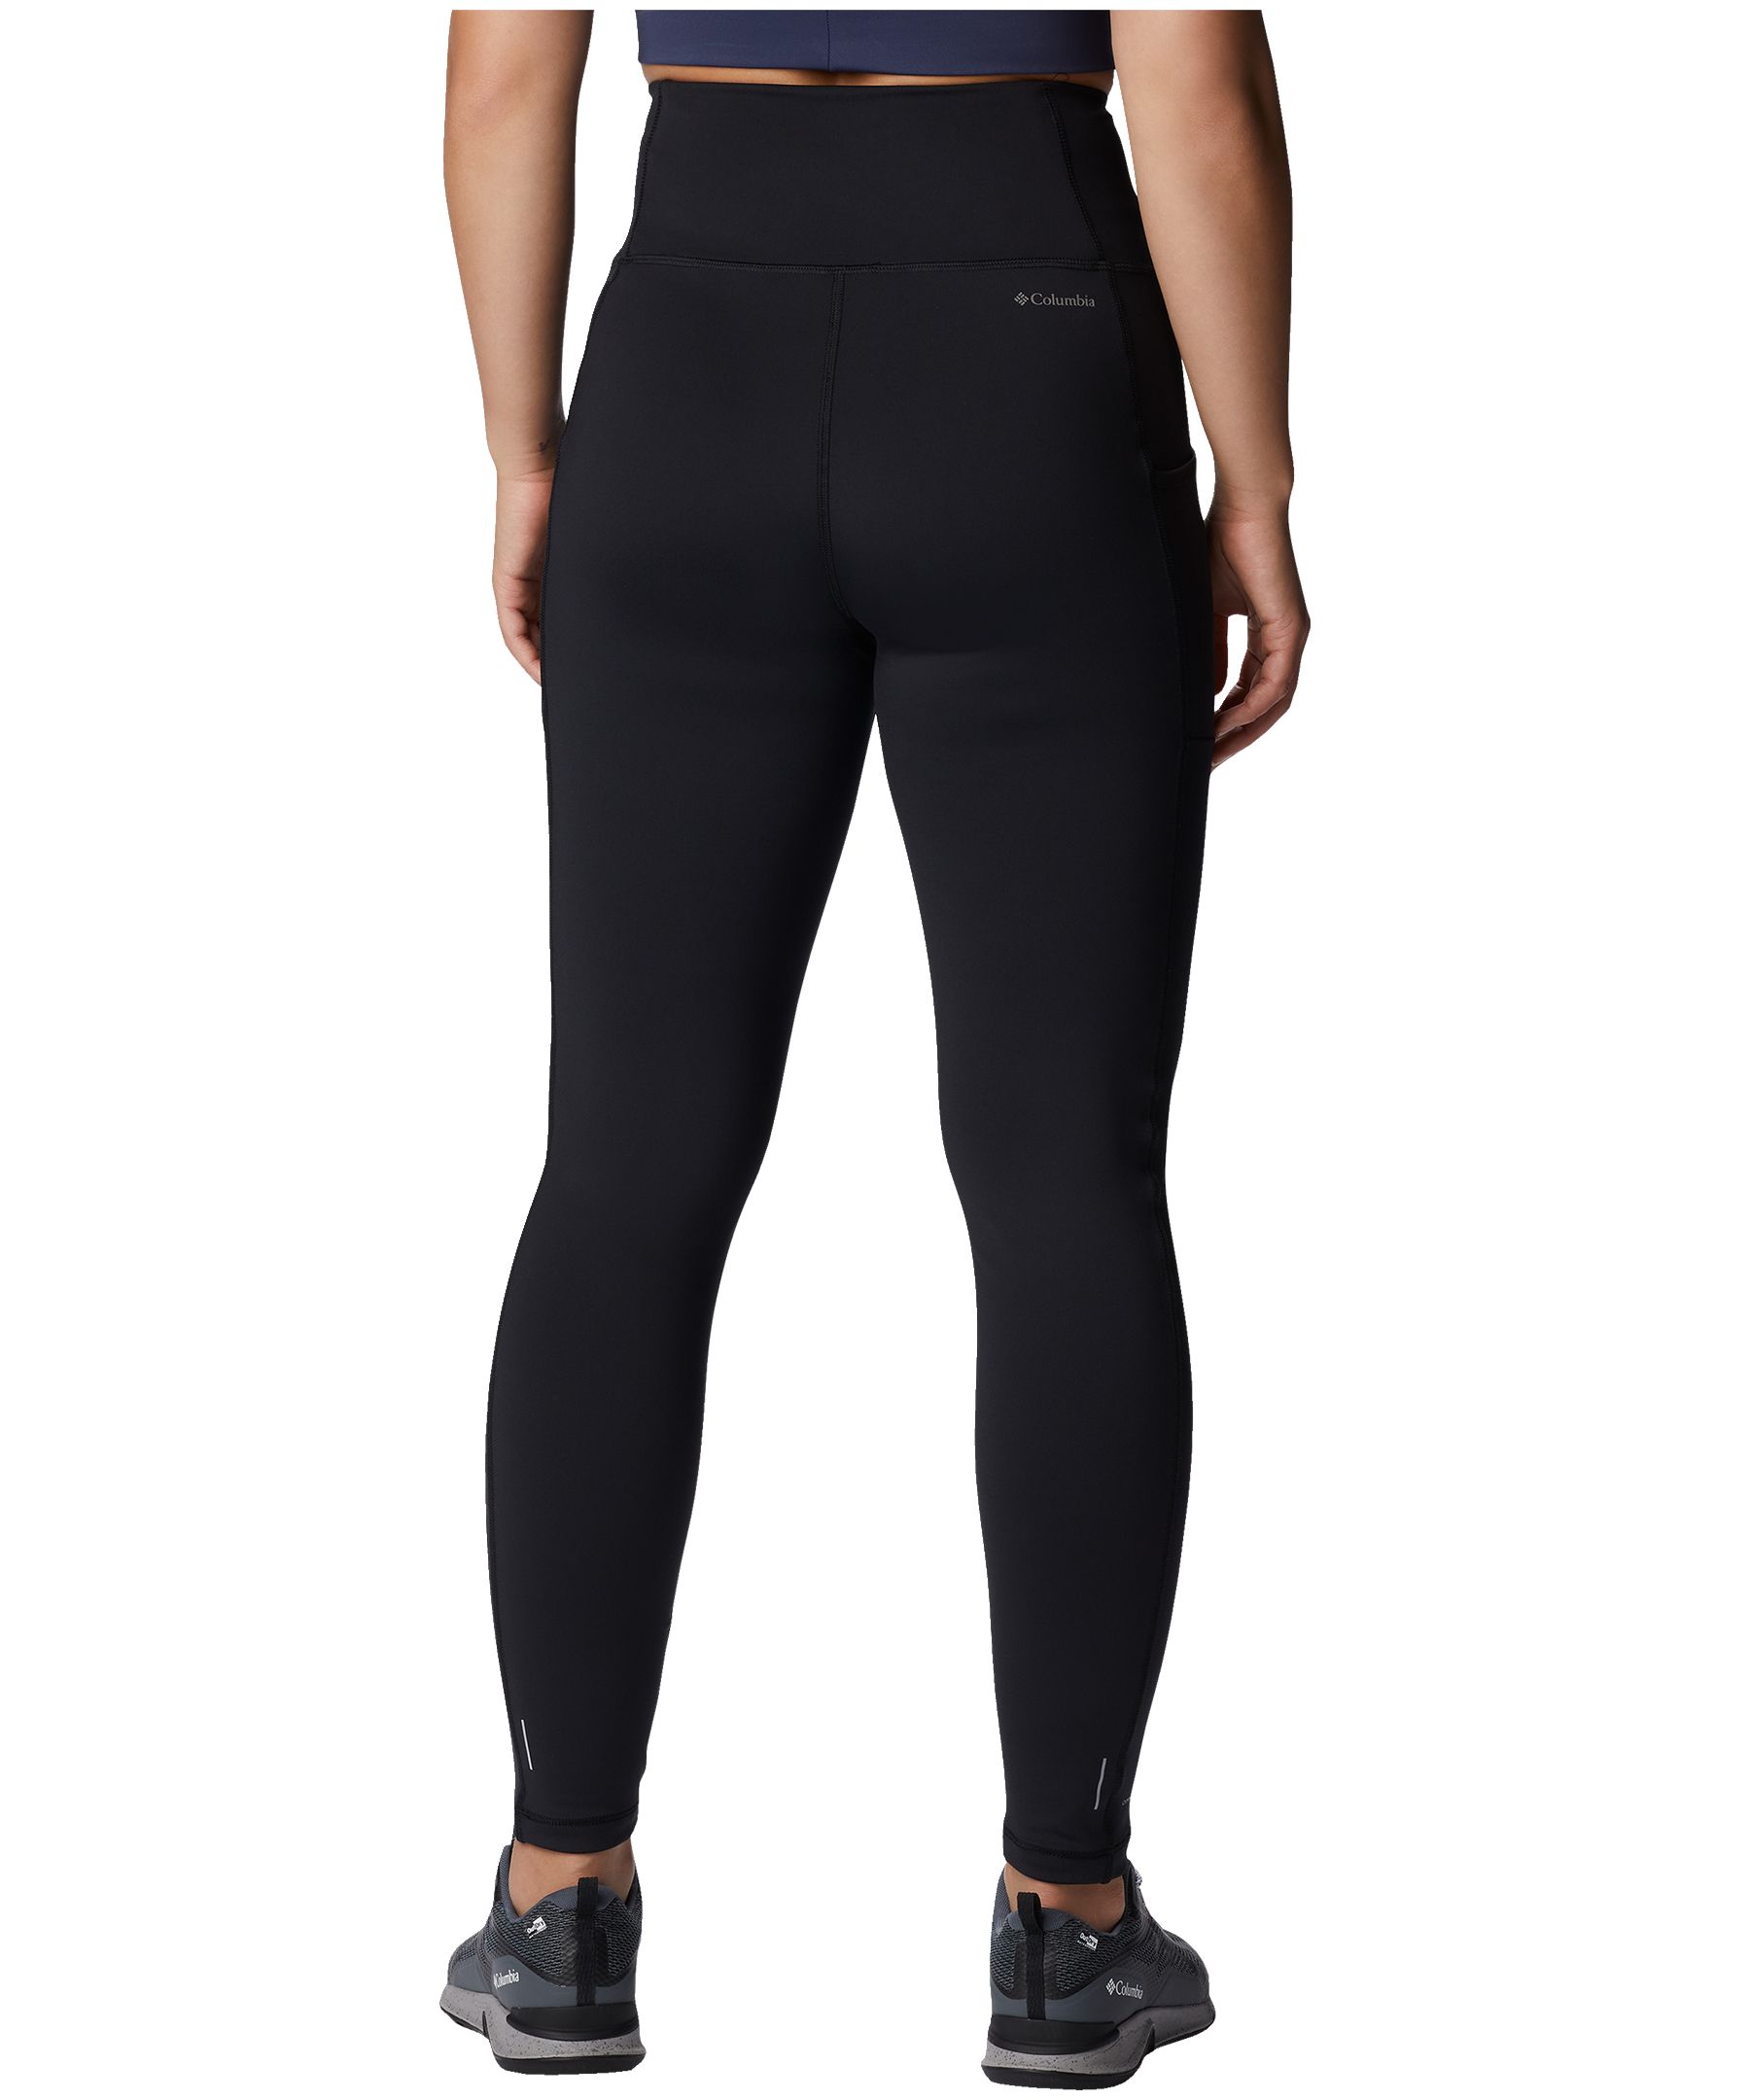 https://media-www.marks.com/product/marks-work-wearhouse/ladies-world/ladies-knits/410035393709/columbia-women-s-windgates-omni-wick-high-rise-leggings-df62395c-c202-423a-a9bc-0b72ee4e17cf-jpgrendition.jpg?imdensity=1&imwidth=1244&impolicy=mZoom